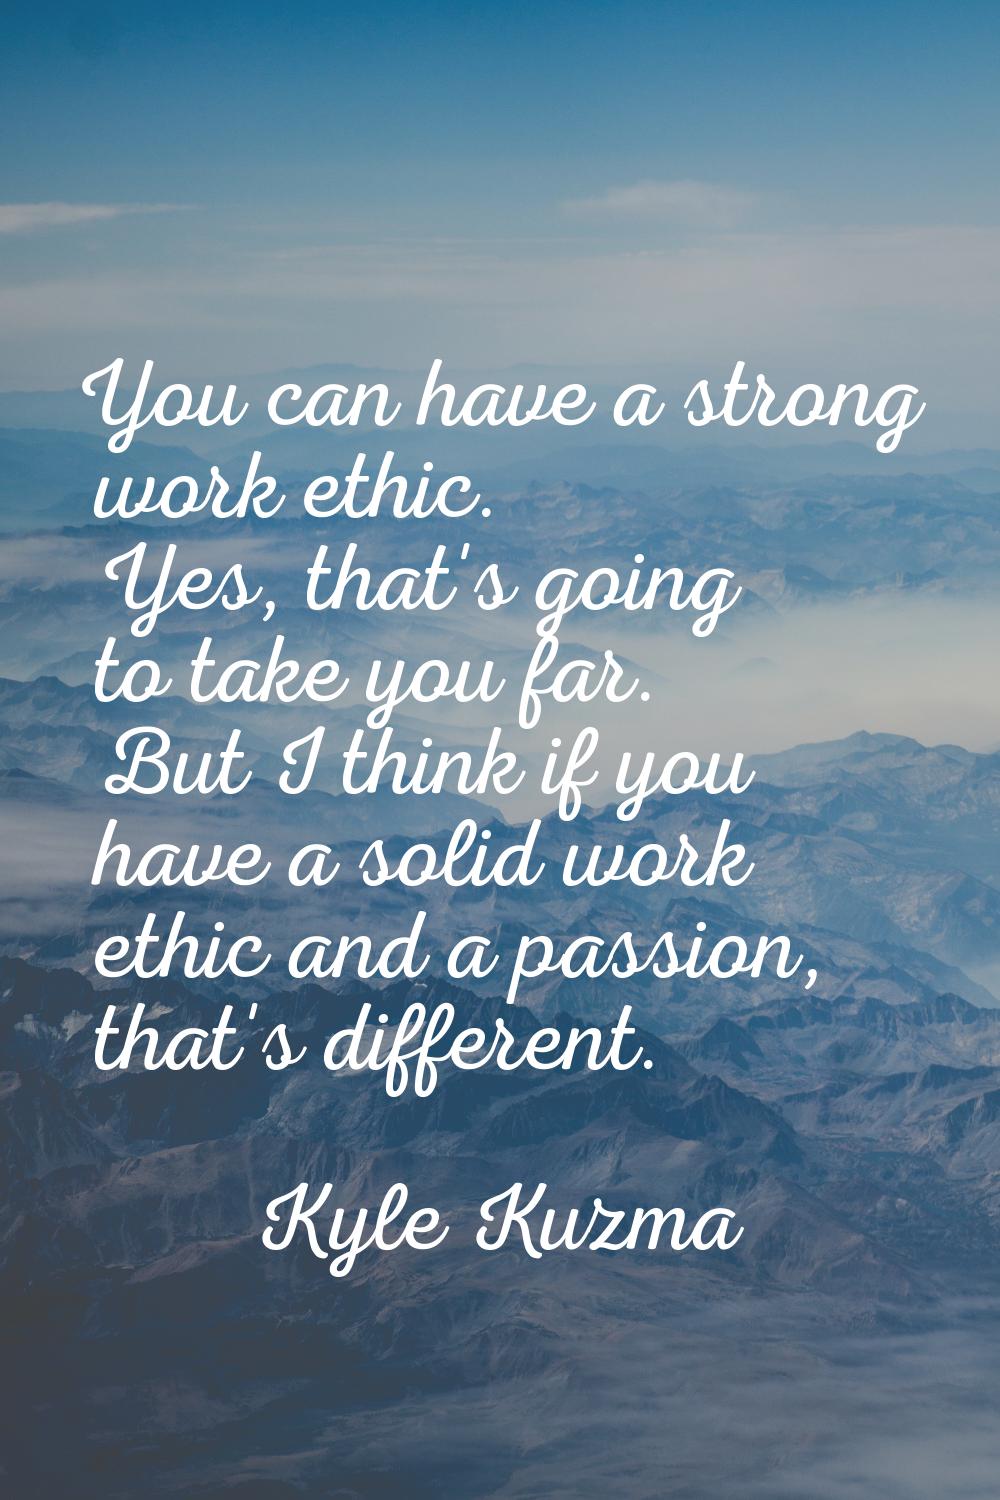 You can have a strong work ethic. Yes, that's going to take you far. But I think if you have a soli